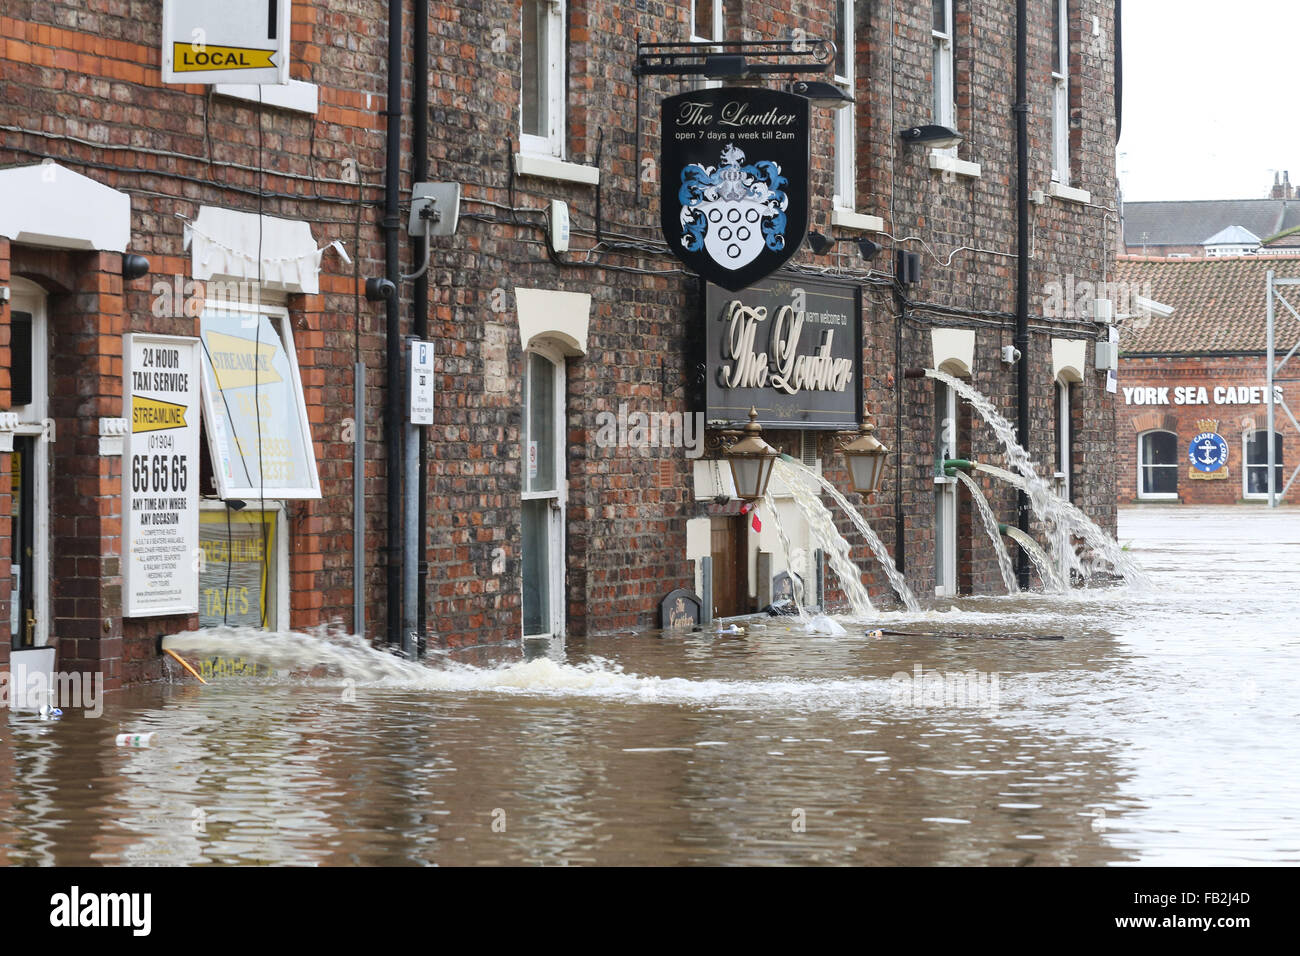 Water pours out of a flooded pub in York, North Yorkshire, UK, after both the River Ouse and Foss burst their banks. Stock Photo